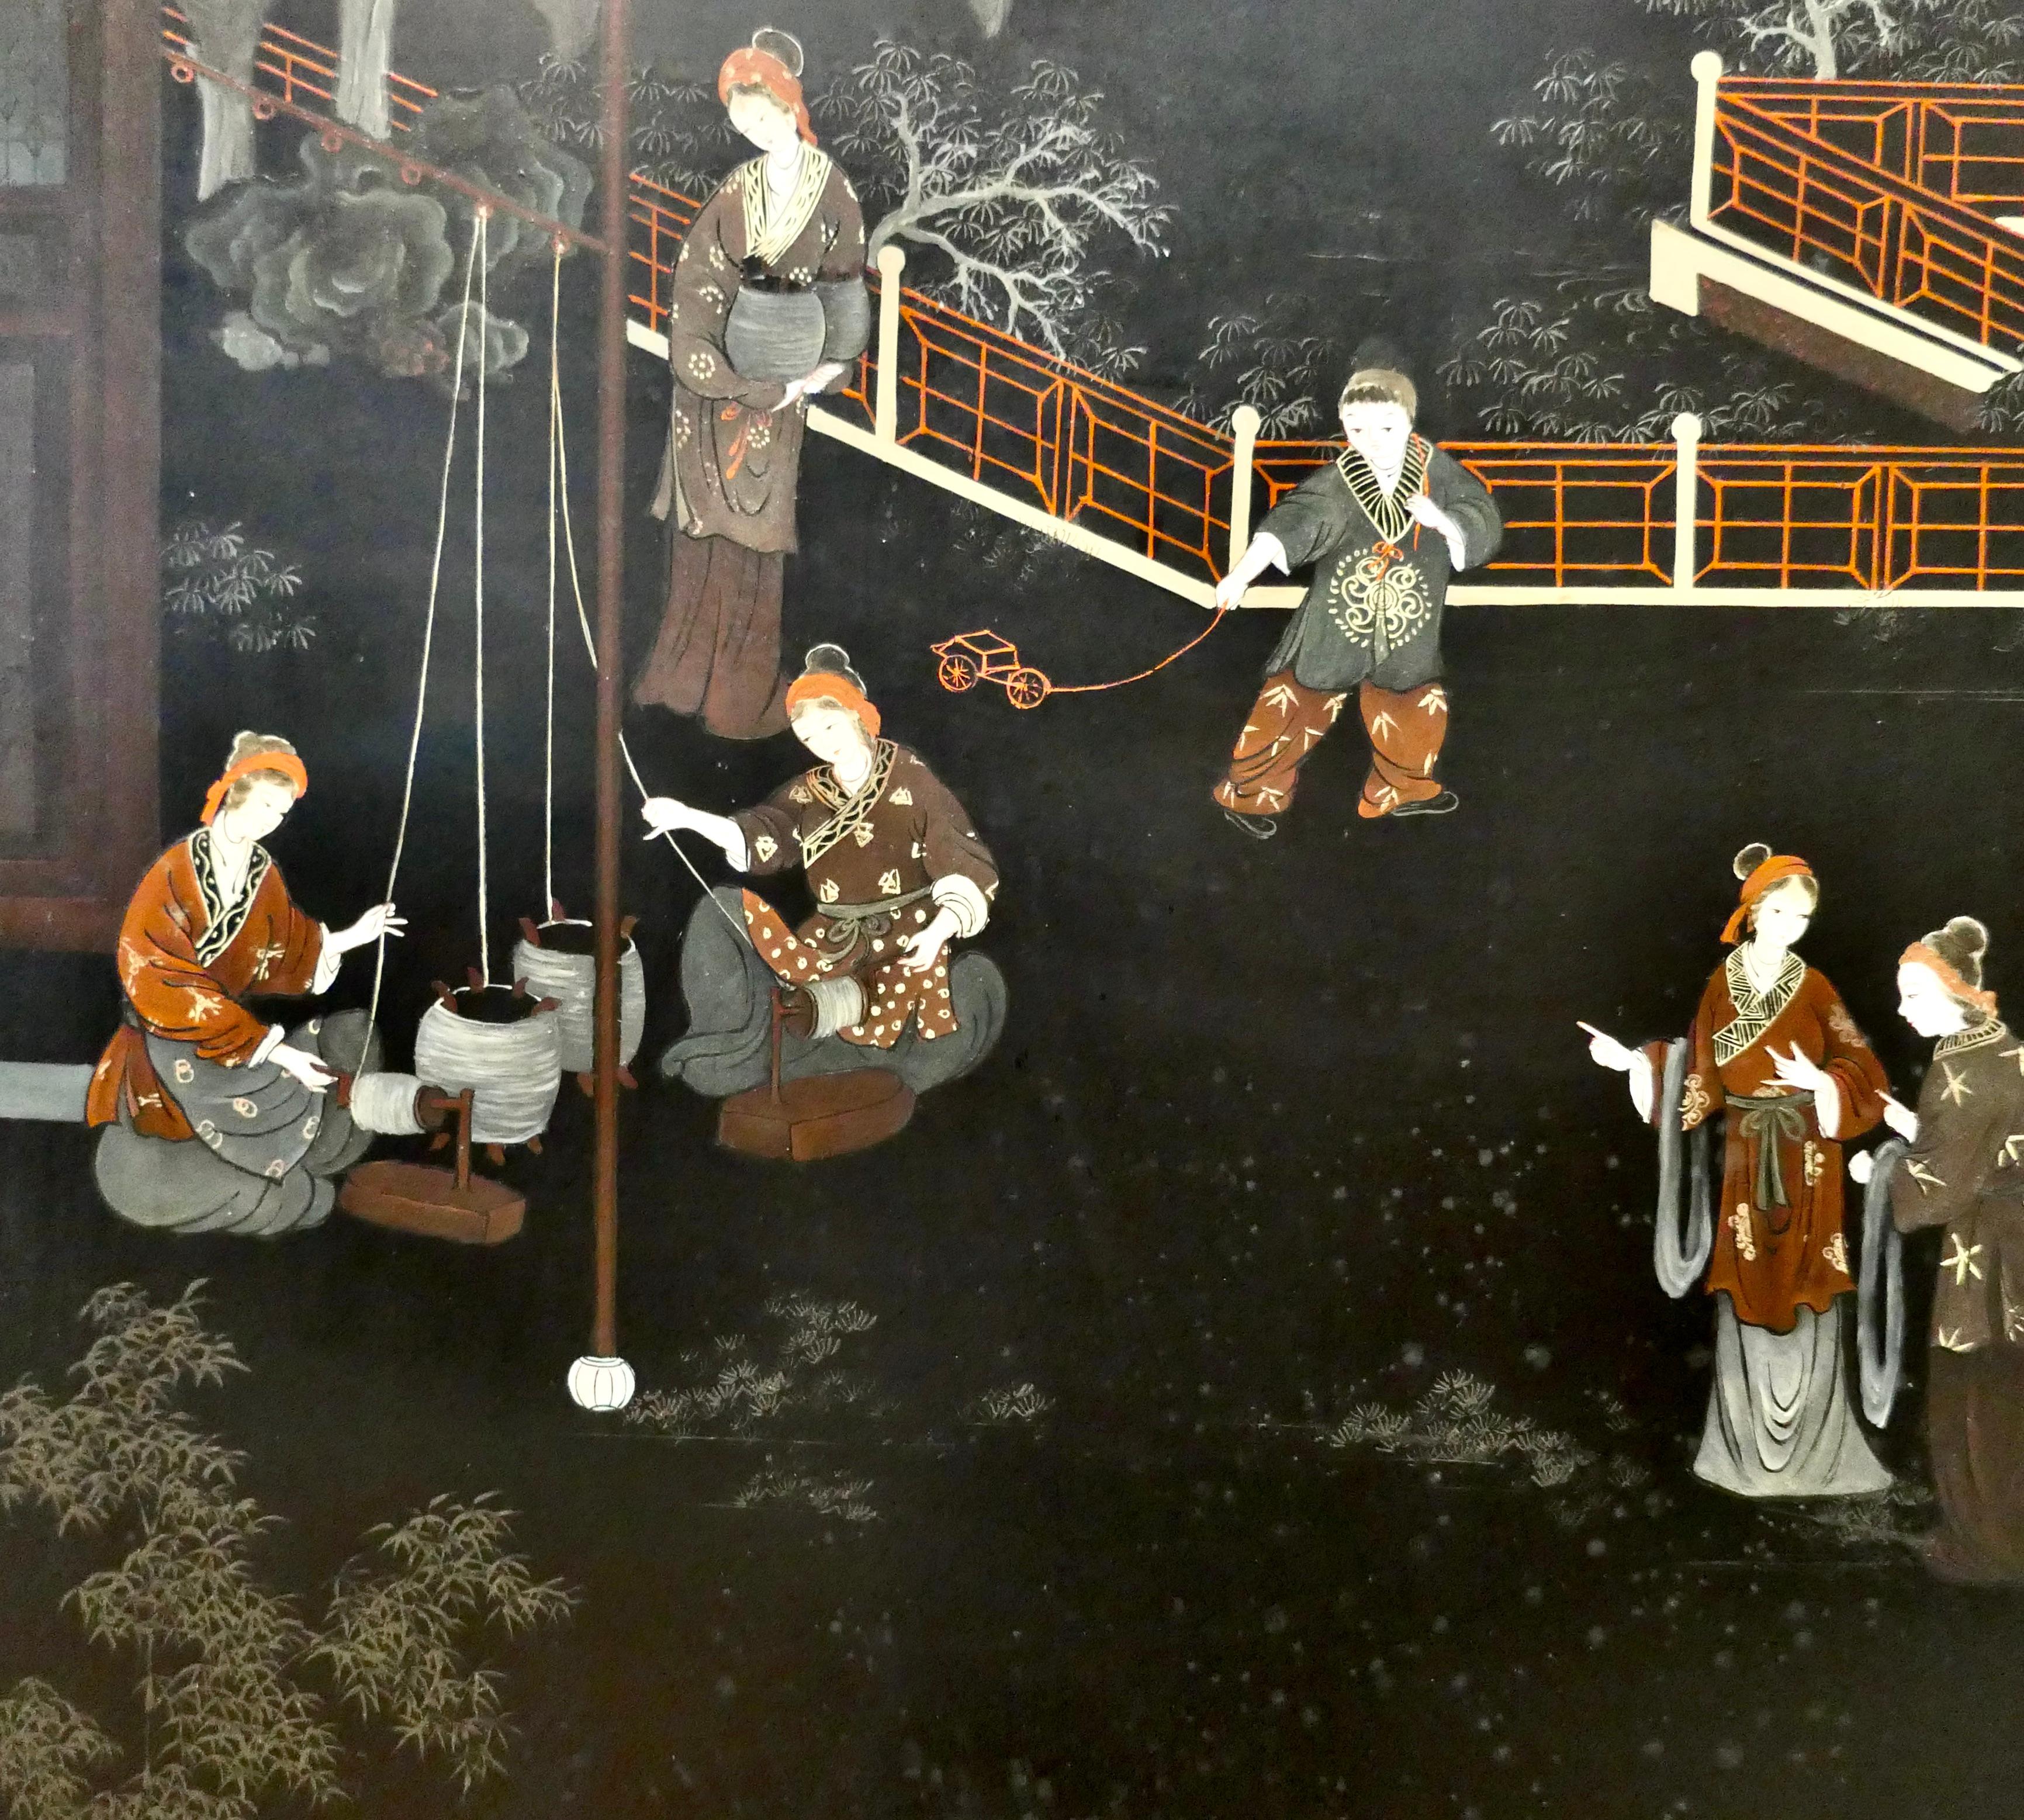 Petite Japanese Lacquer and Painted 3 Fold Screen, in The Garden

This delightful 3 fold screen is decorated on both sides, one side is decorated with scenes from the garden, with children playing and the women’s spinning silk threads
The other side